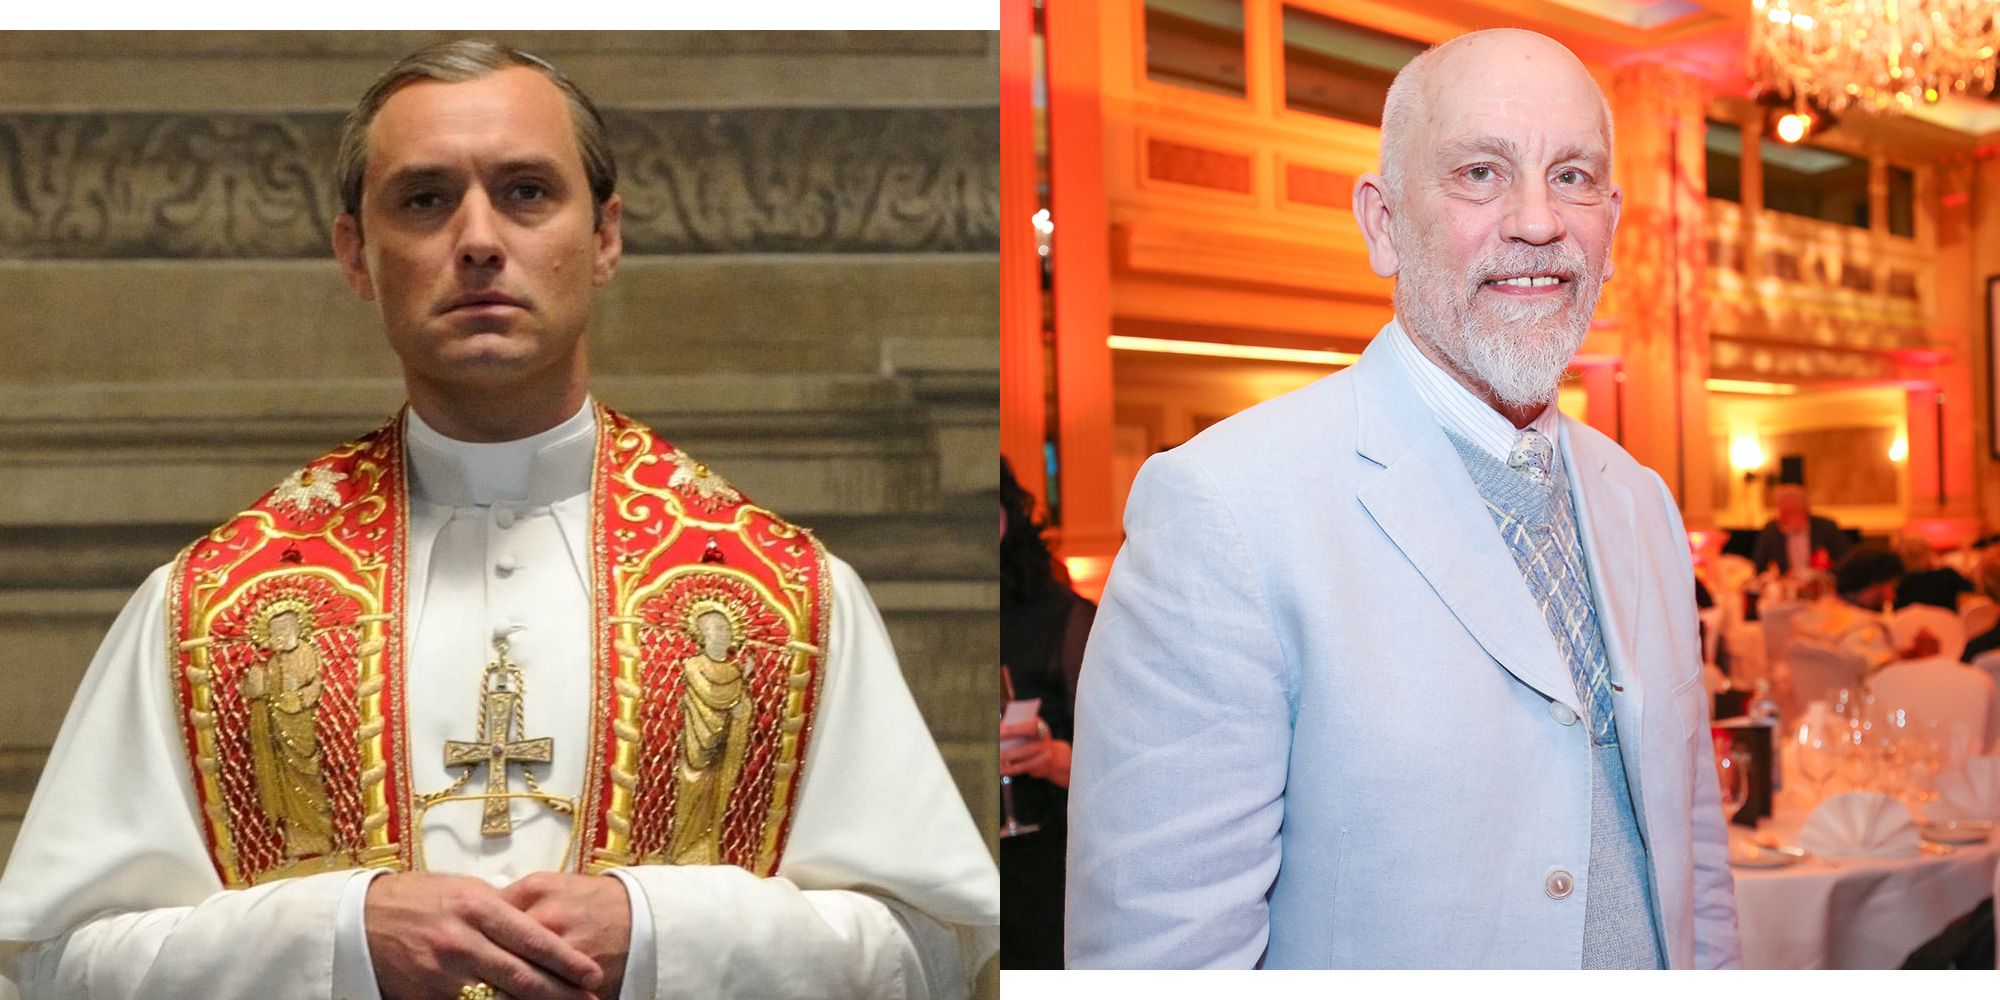 The Young Season 2 - Jude and John Malkovich Will Star in The New Pope